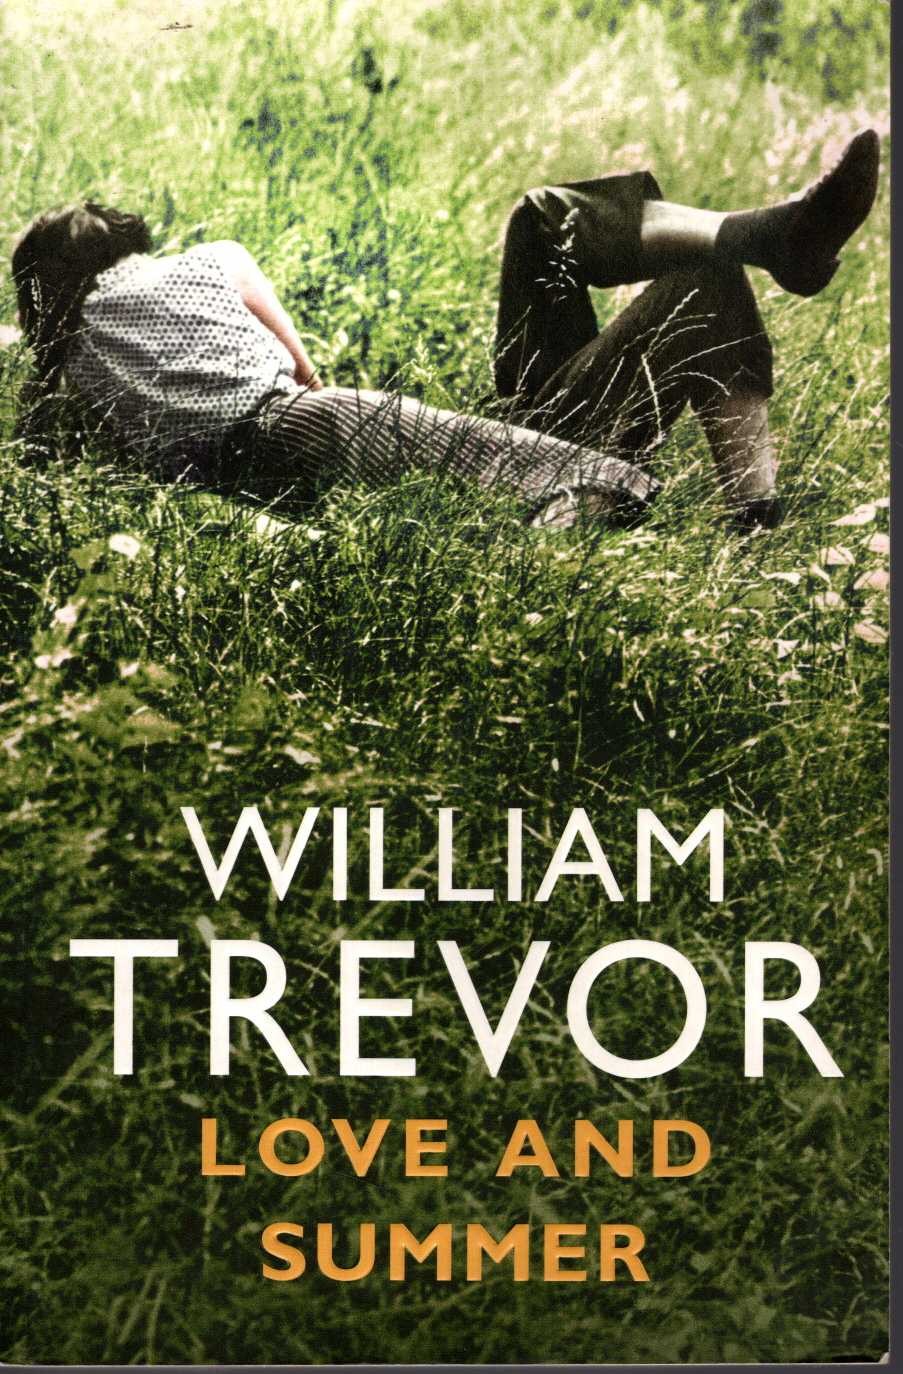 William Trevor  LOVE AND SUMMER front book cover image